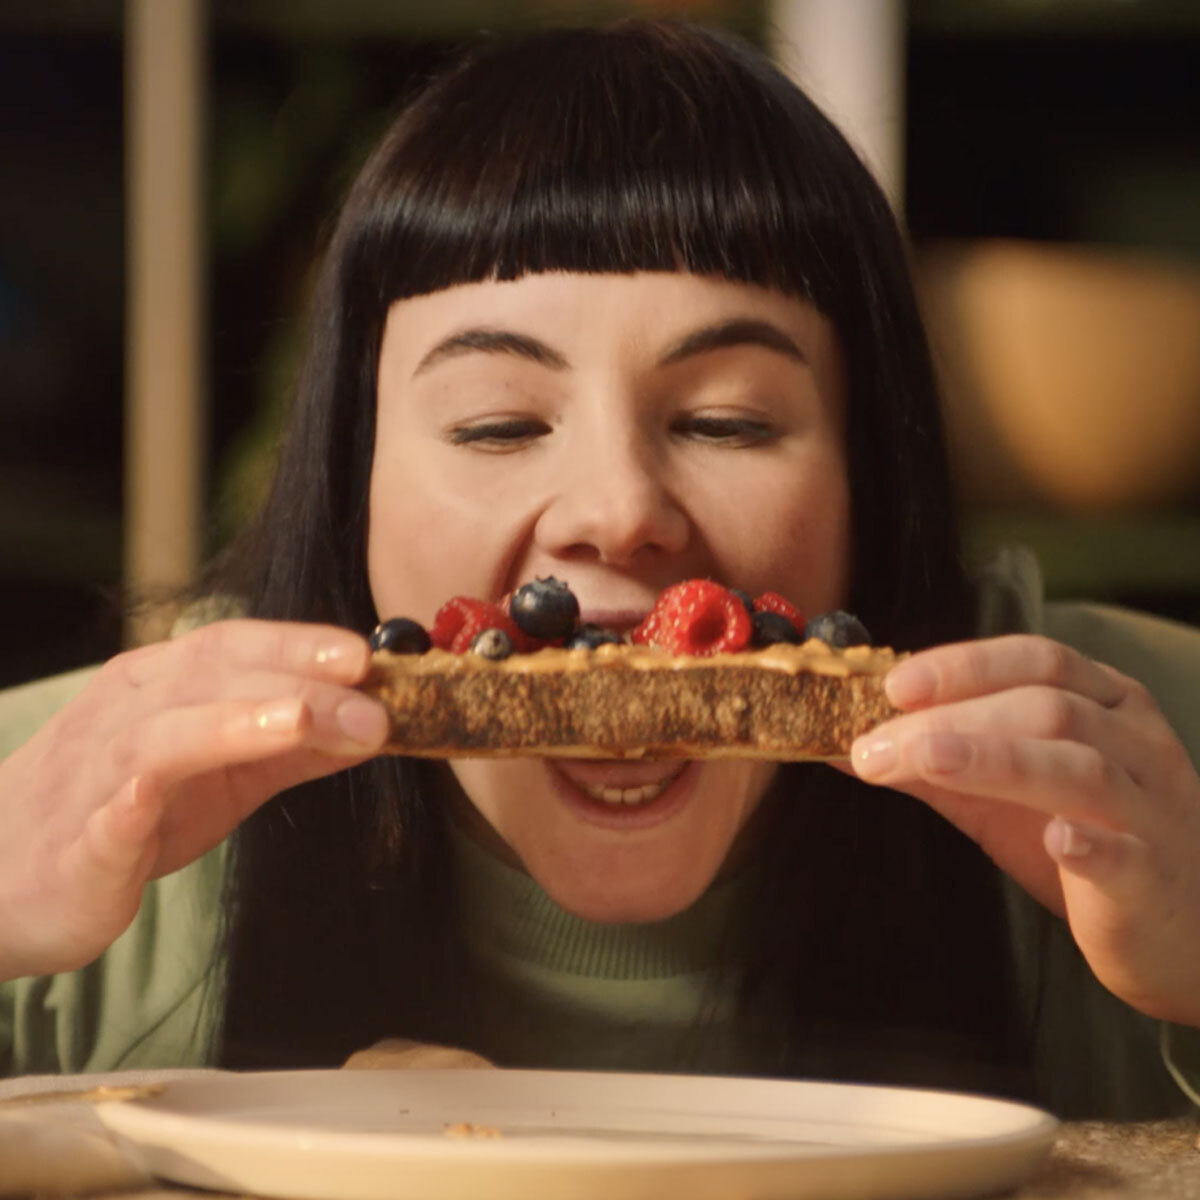 A Woman Eating Peanut Butter on Bread